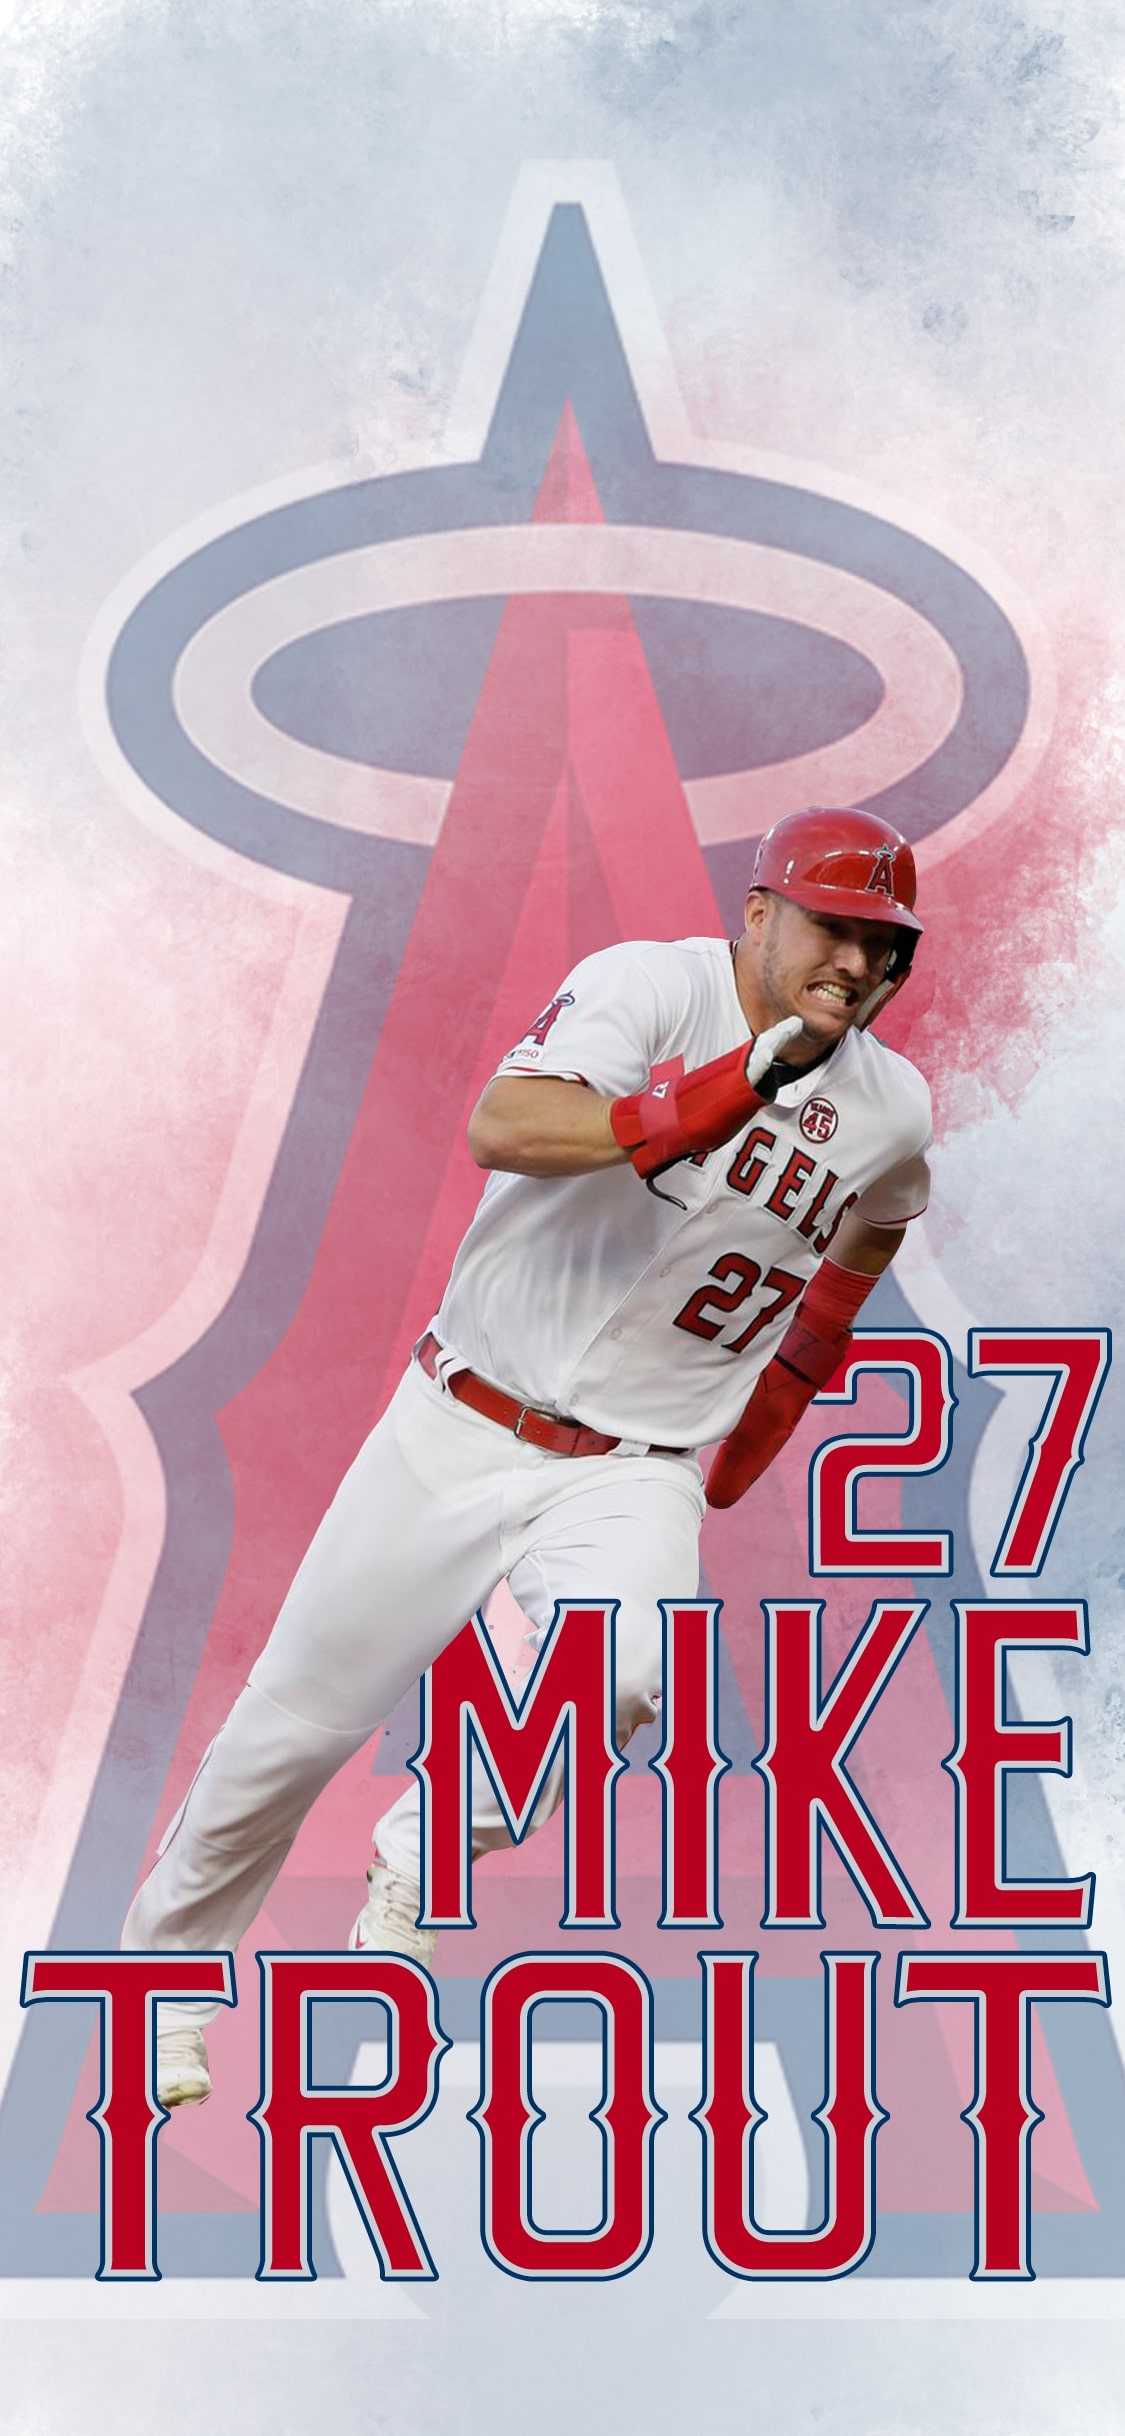 Mike trout iphone HD wallpapers